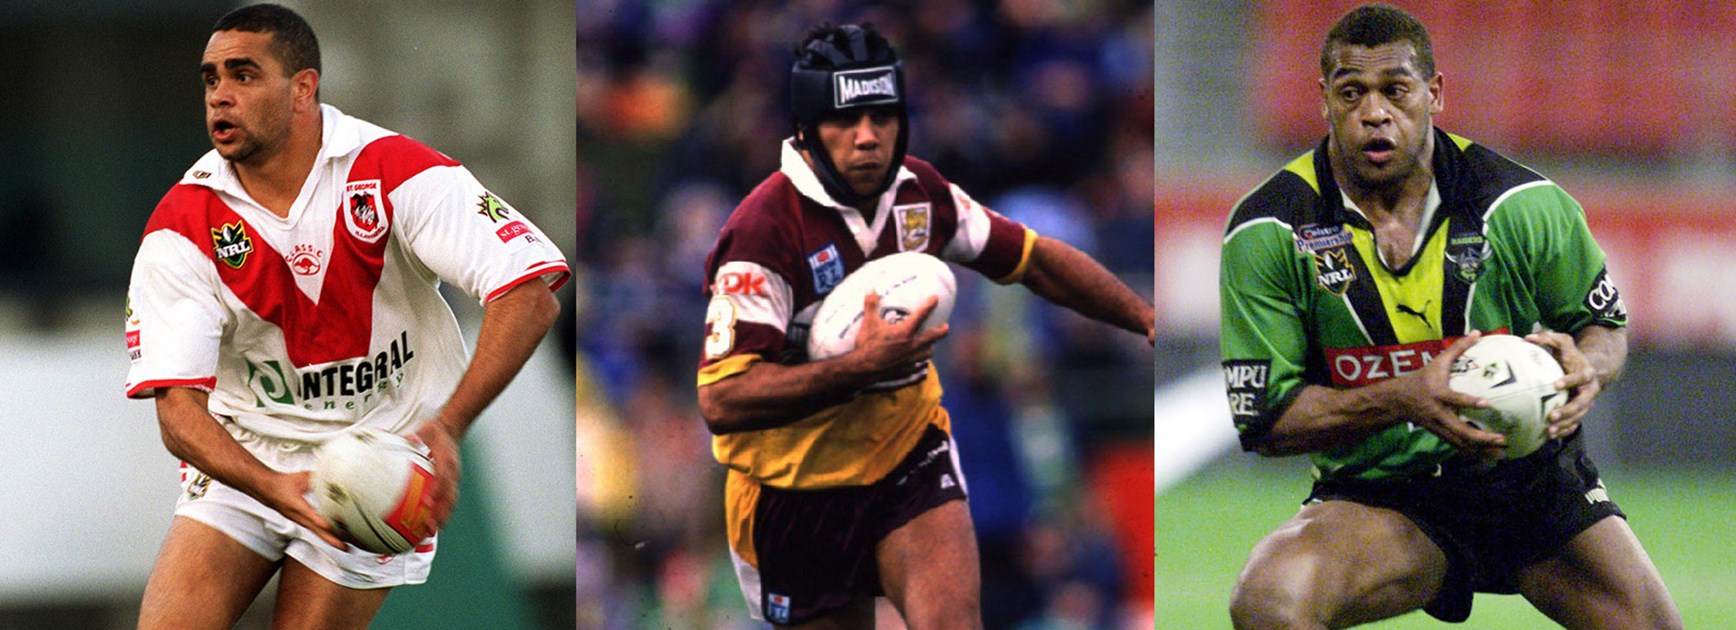 Nathan Blacklock, Steve Renouf and Ken Nagas were just some of the players nominated by today's NRL stars as their favourite Indigenous player of all time.